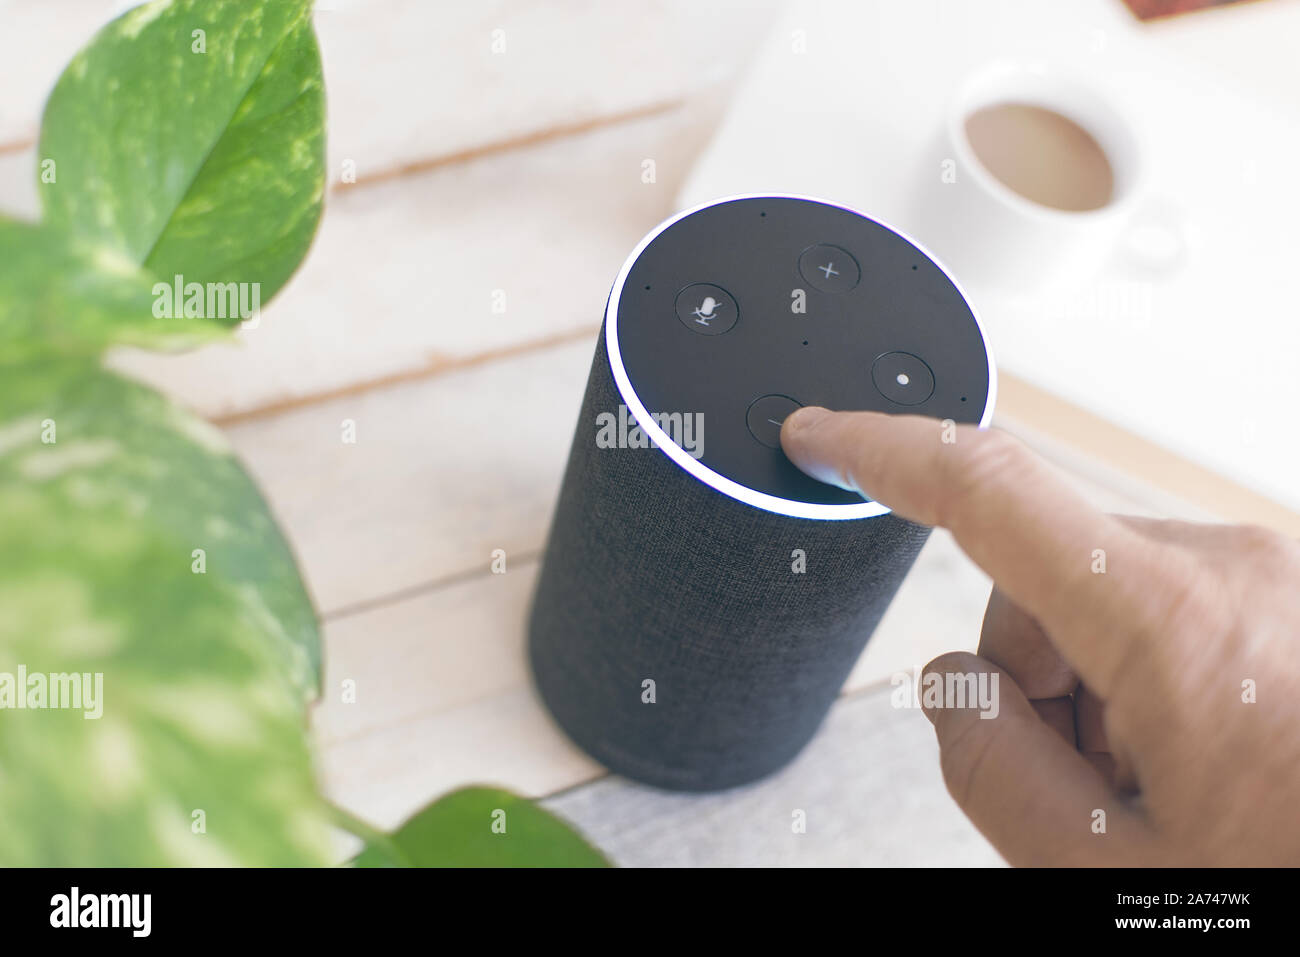 Hand of an user with a home automation, intelligent speaker device. Empty copy space for Editor's text. Stock Photo